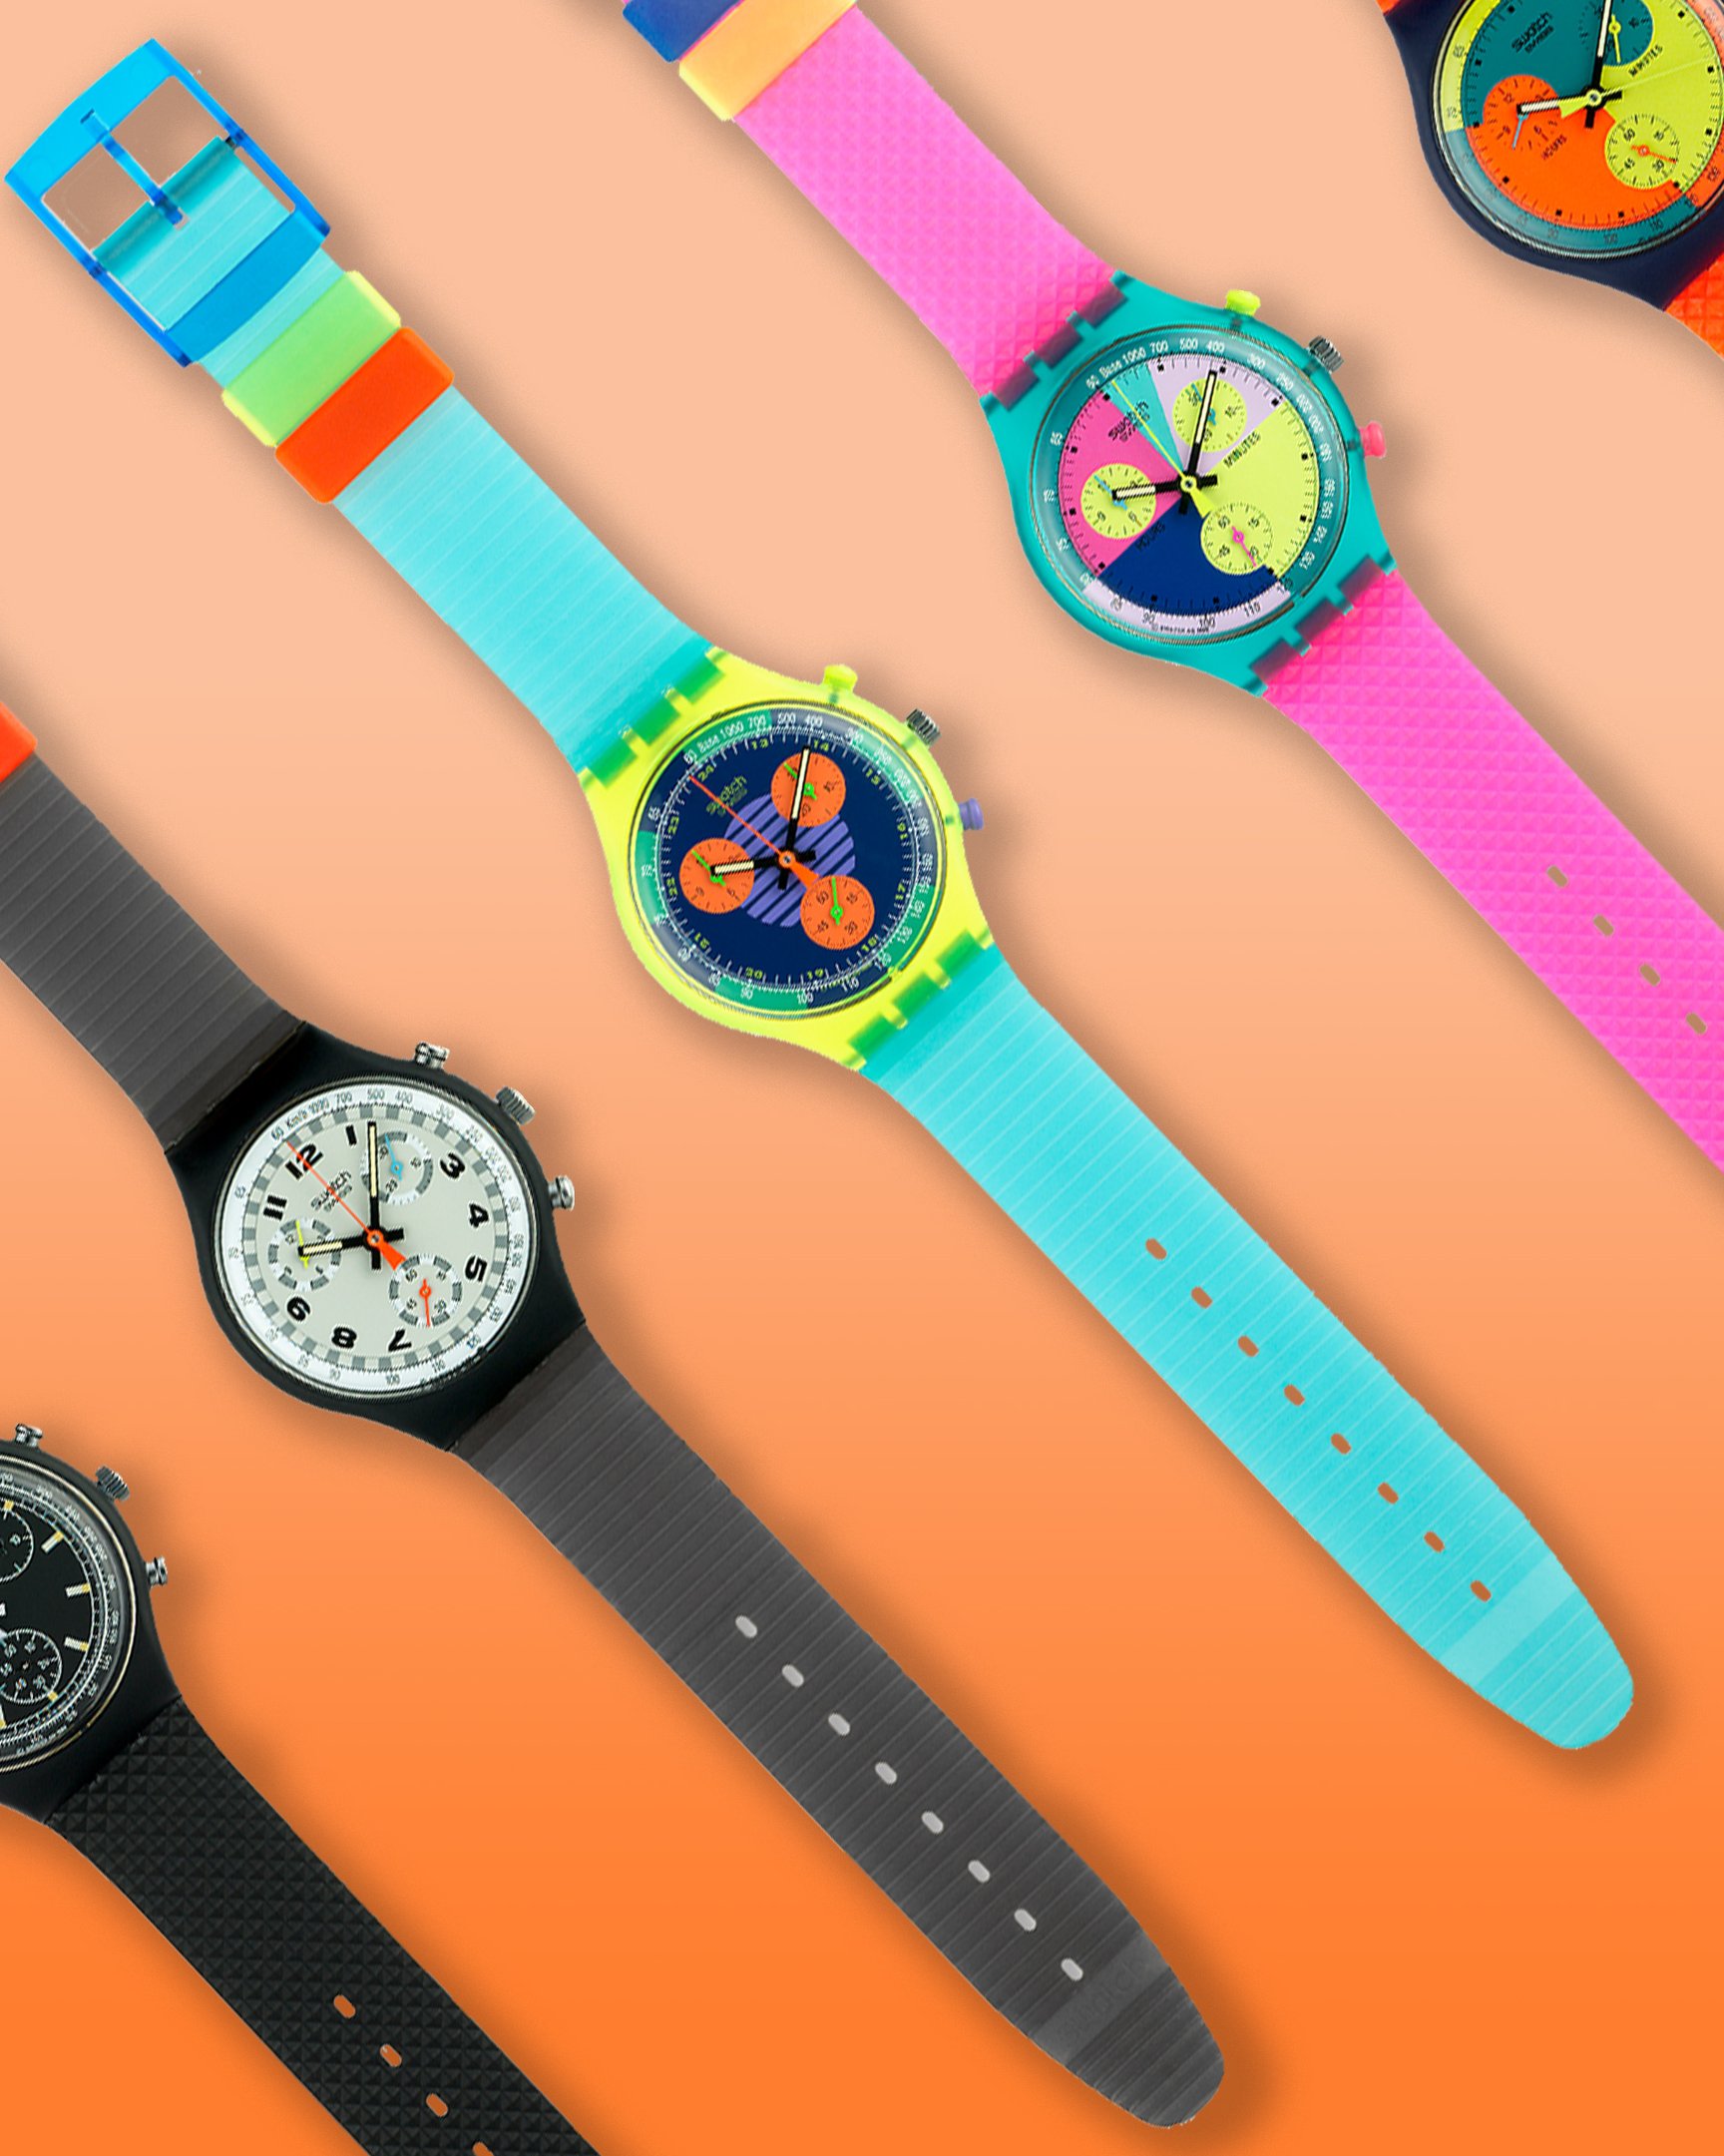 The Swatch Group Watch Brands